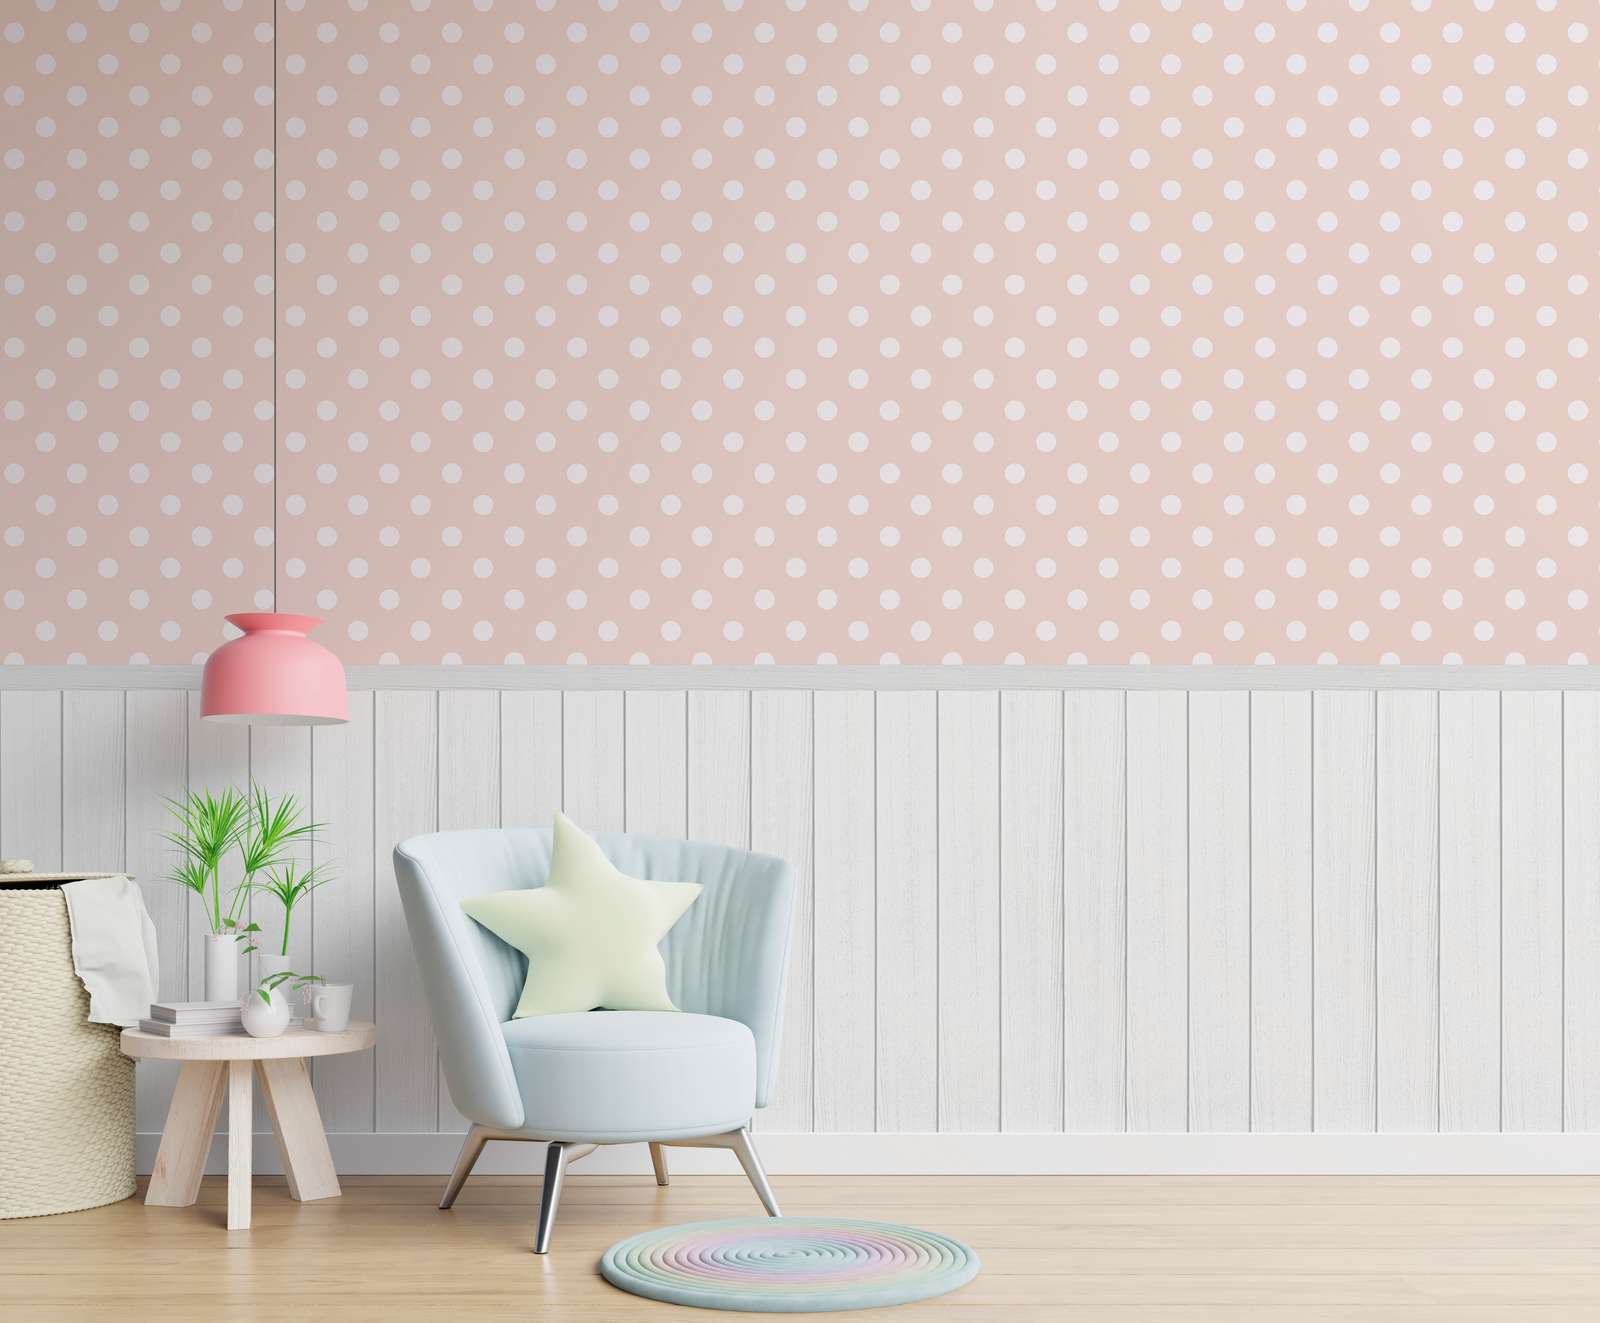             Non-woven motif wallpaper with wood-effect plinth border and dot pattern - white, grey, pink
        